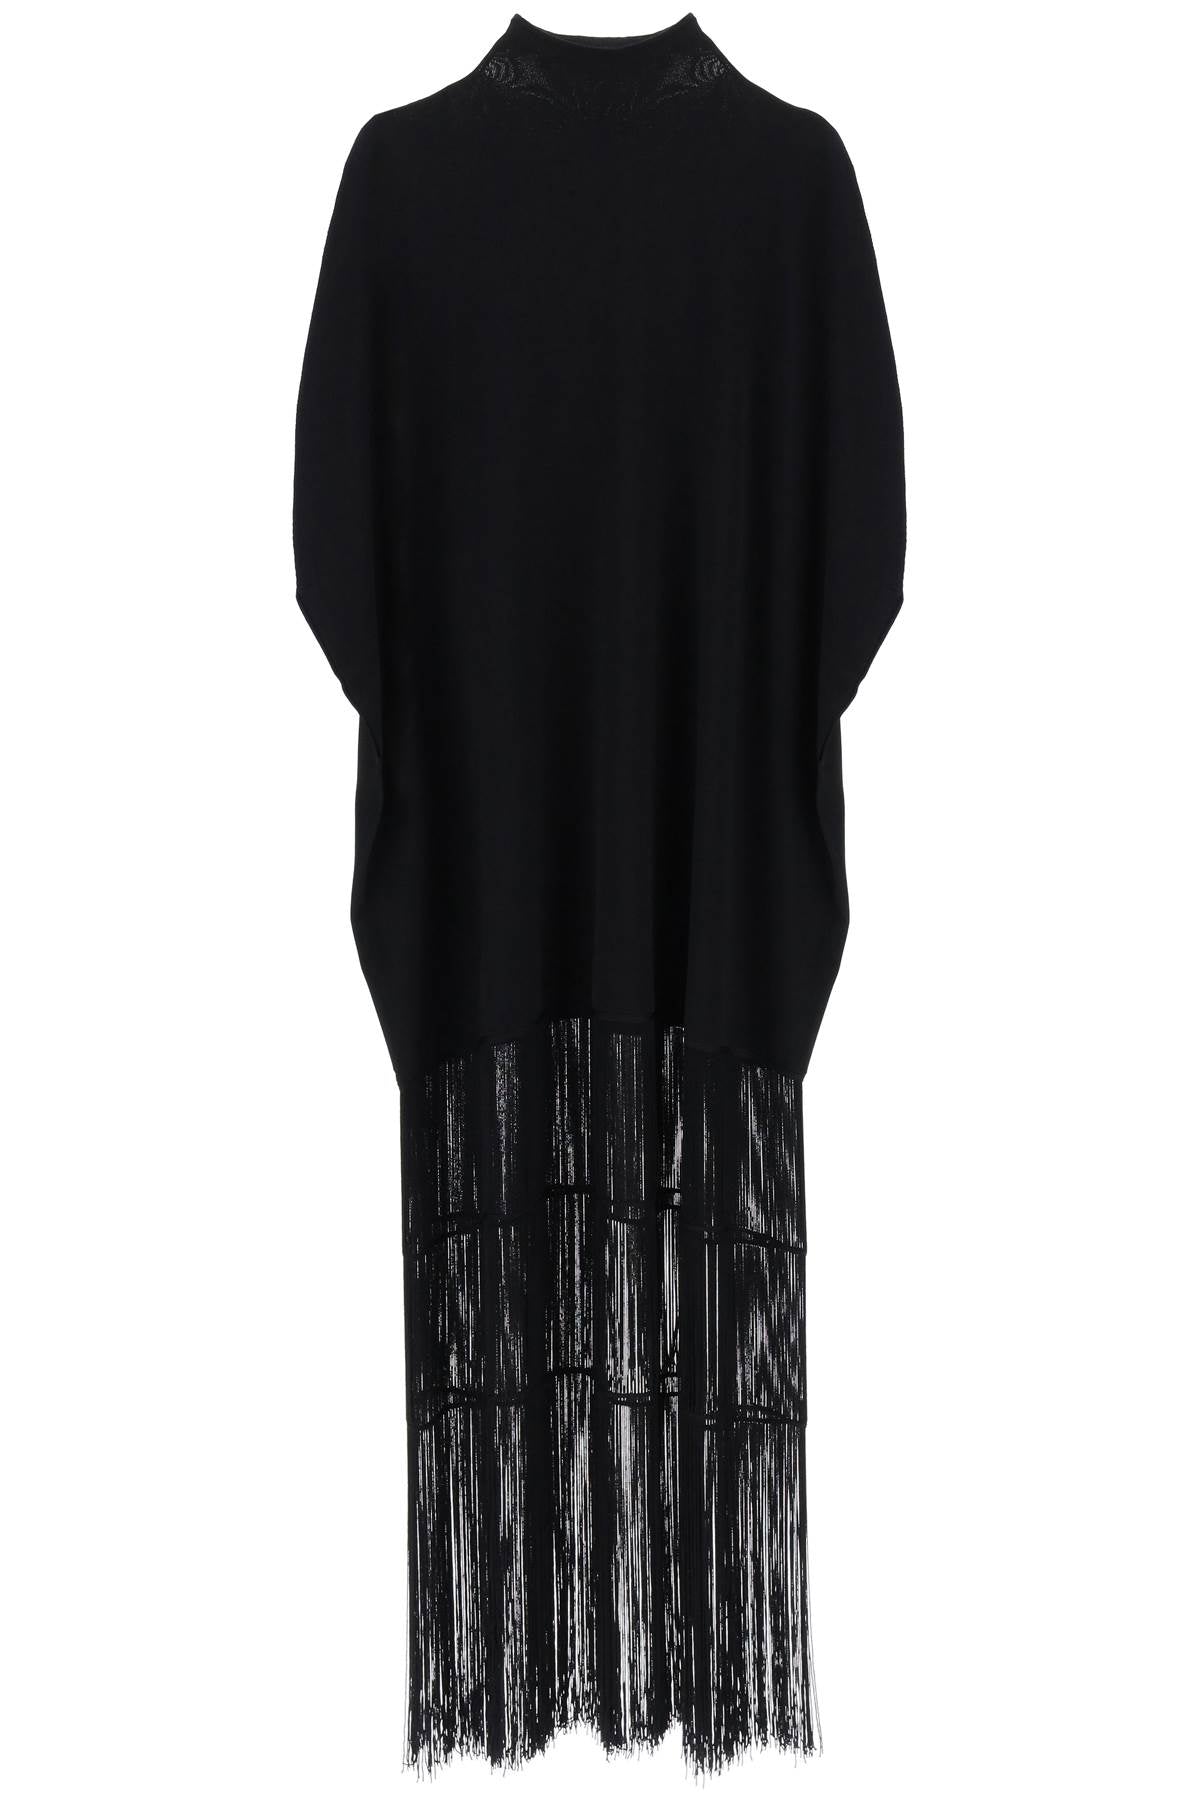 KHAITE Black Ruffle Dress for Women in Stretch Viscose Knit - SS24 Collection